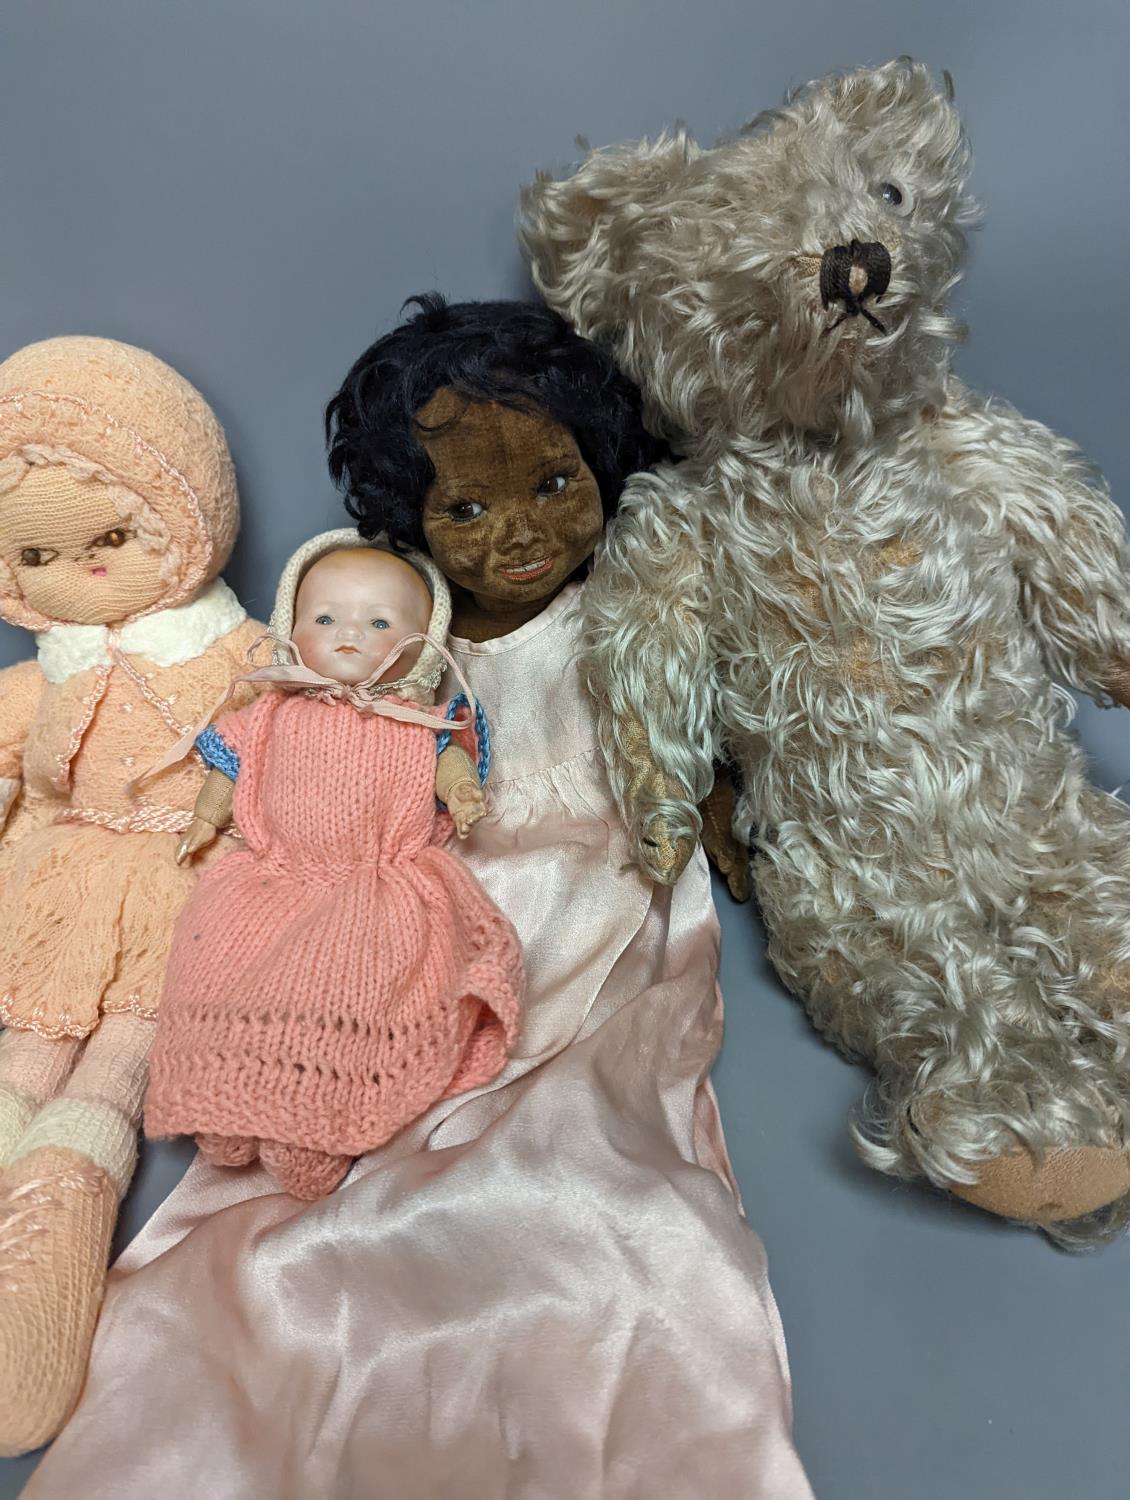 A Nora Wellings type mulatto doll and an Armmand Marseille doll 341, teddy etc, mulatto doll 43cms - Image 4 of 5